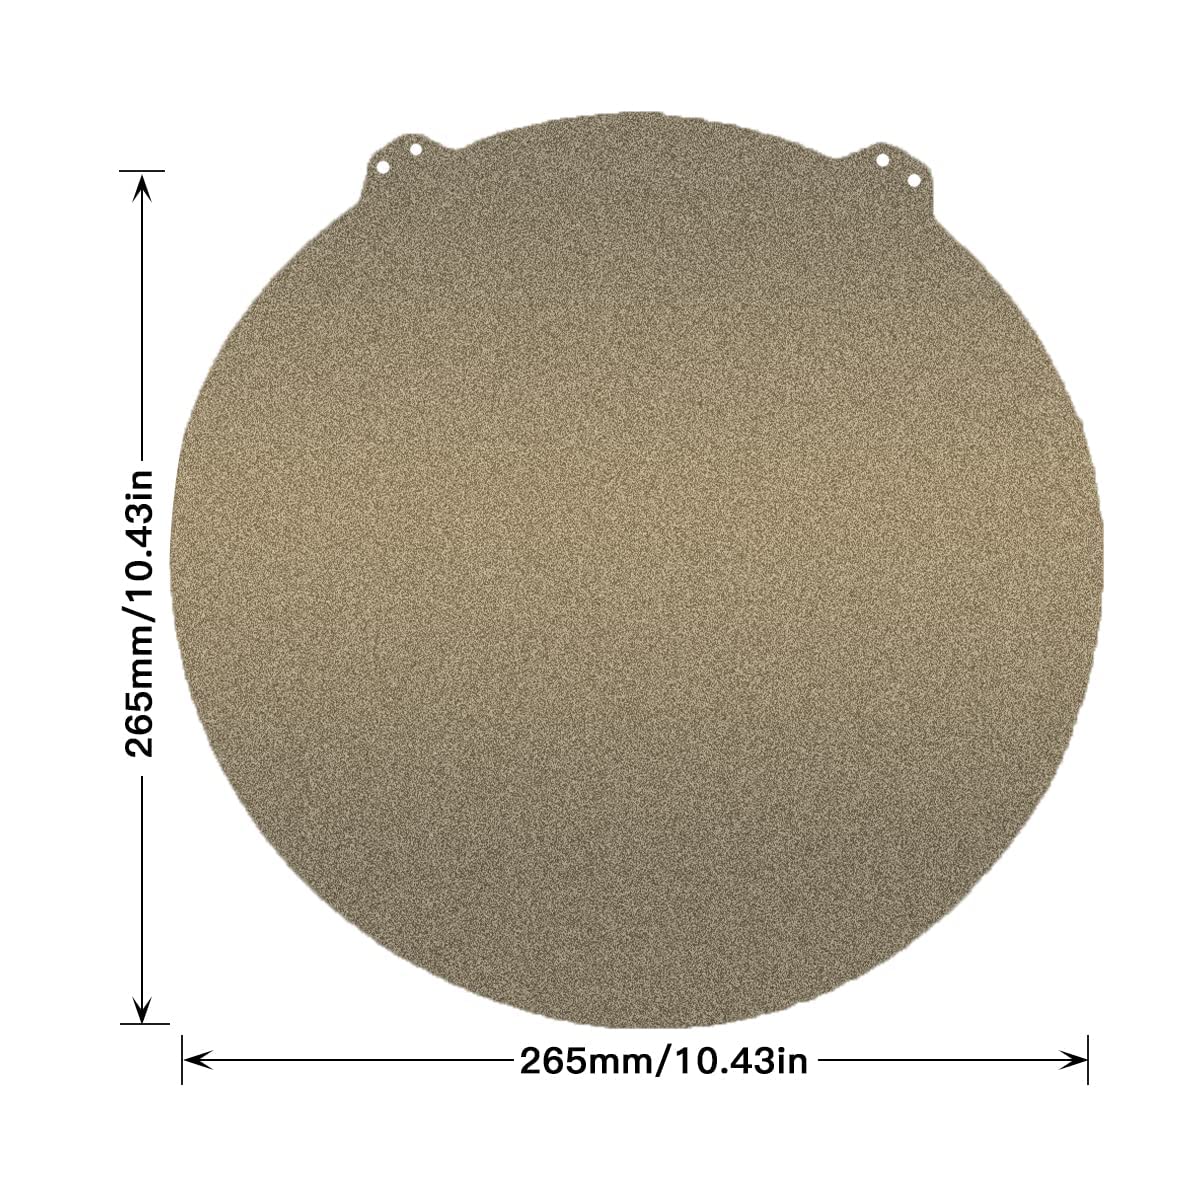 Round Spring Steel Gold Powder Coated PEI Build Plate + Magnetic Sticker for FLSUN QQ-S Pro / SR 3D Printer